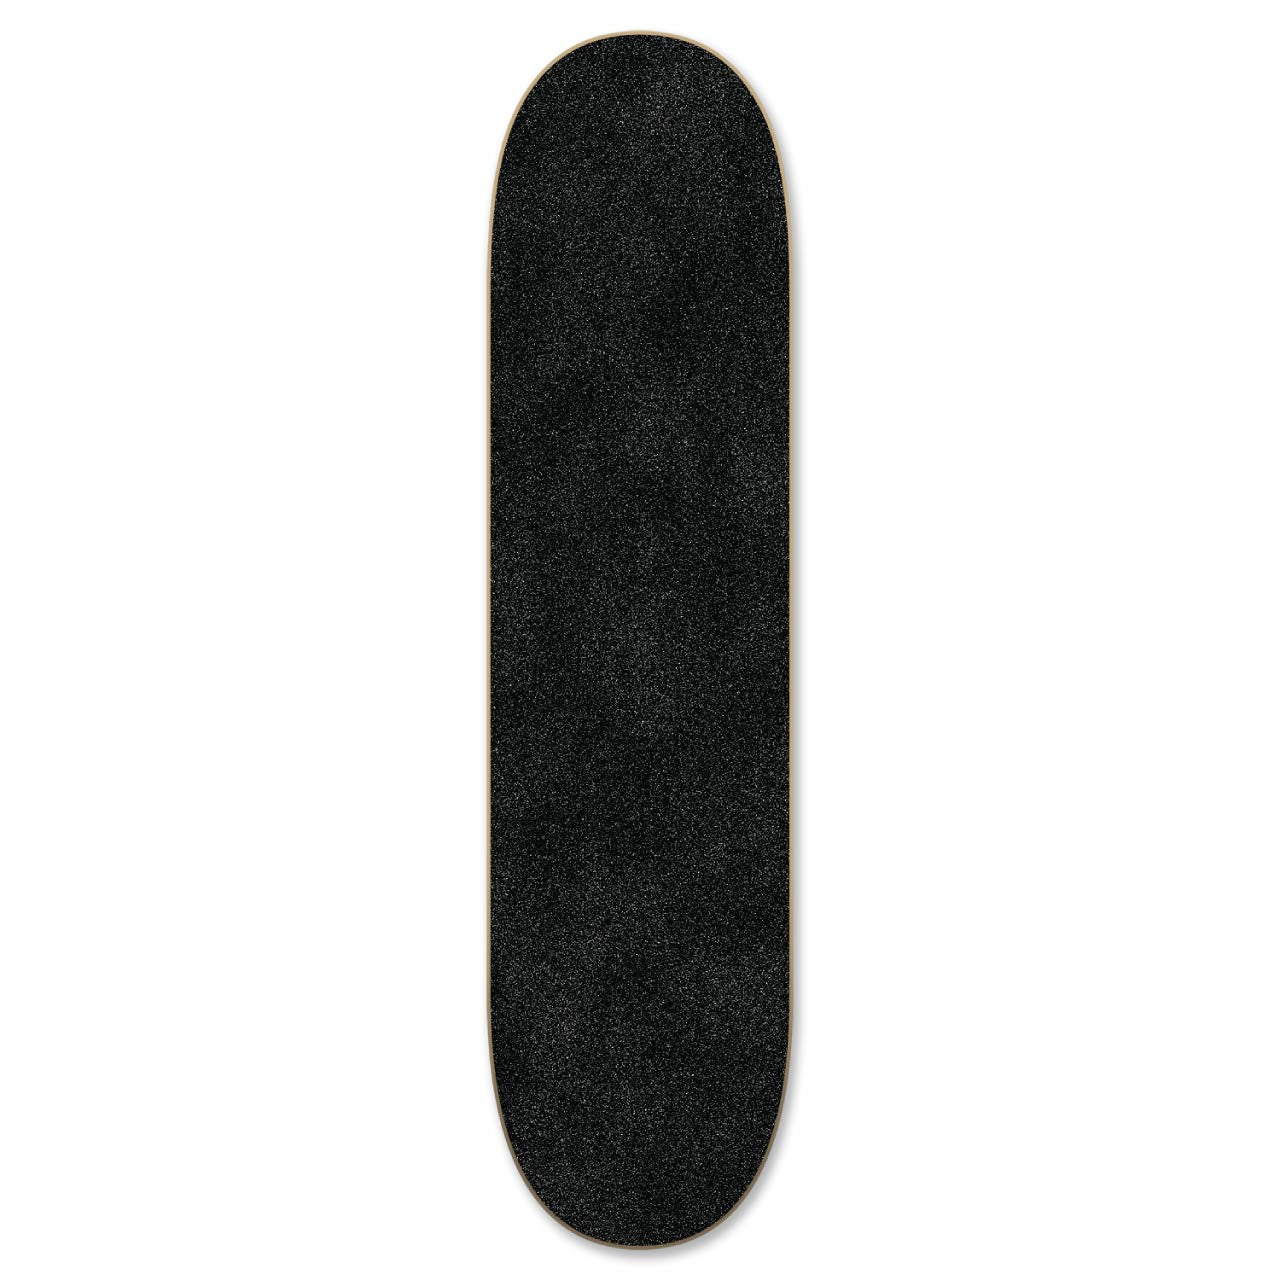 Yocaher Blank Skateboard Deck - Stained Green